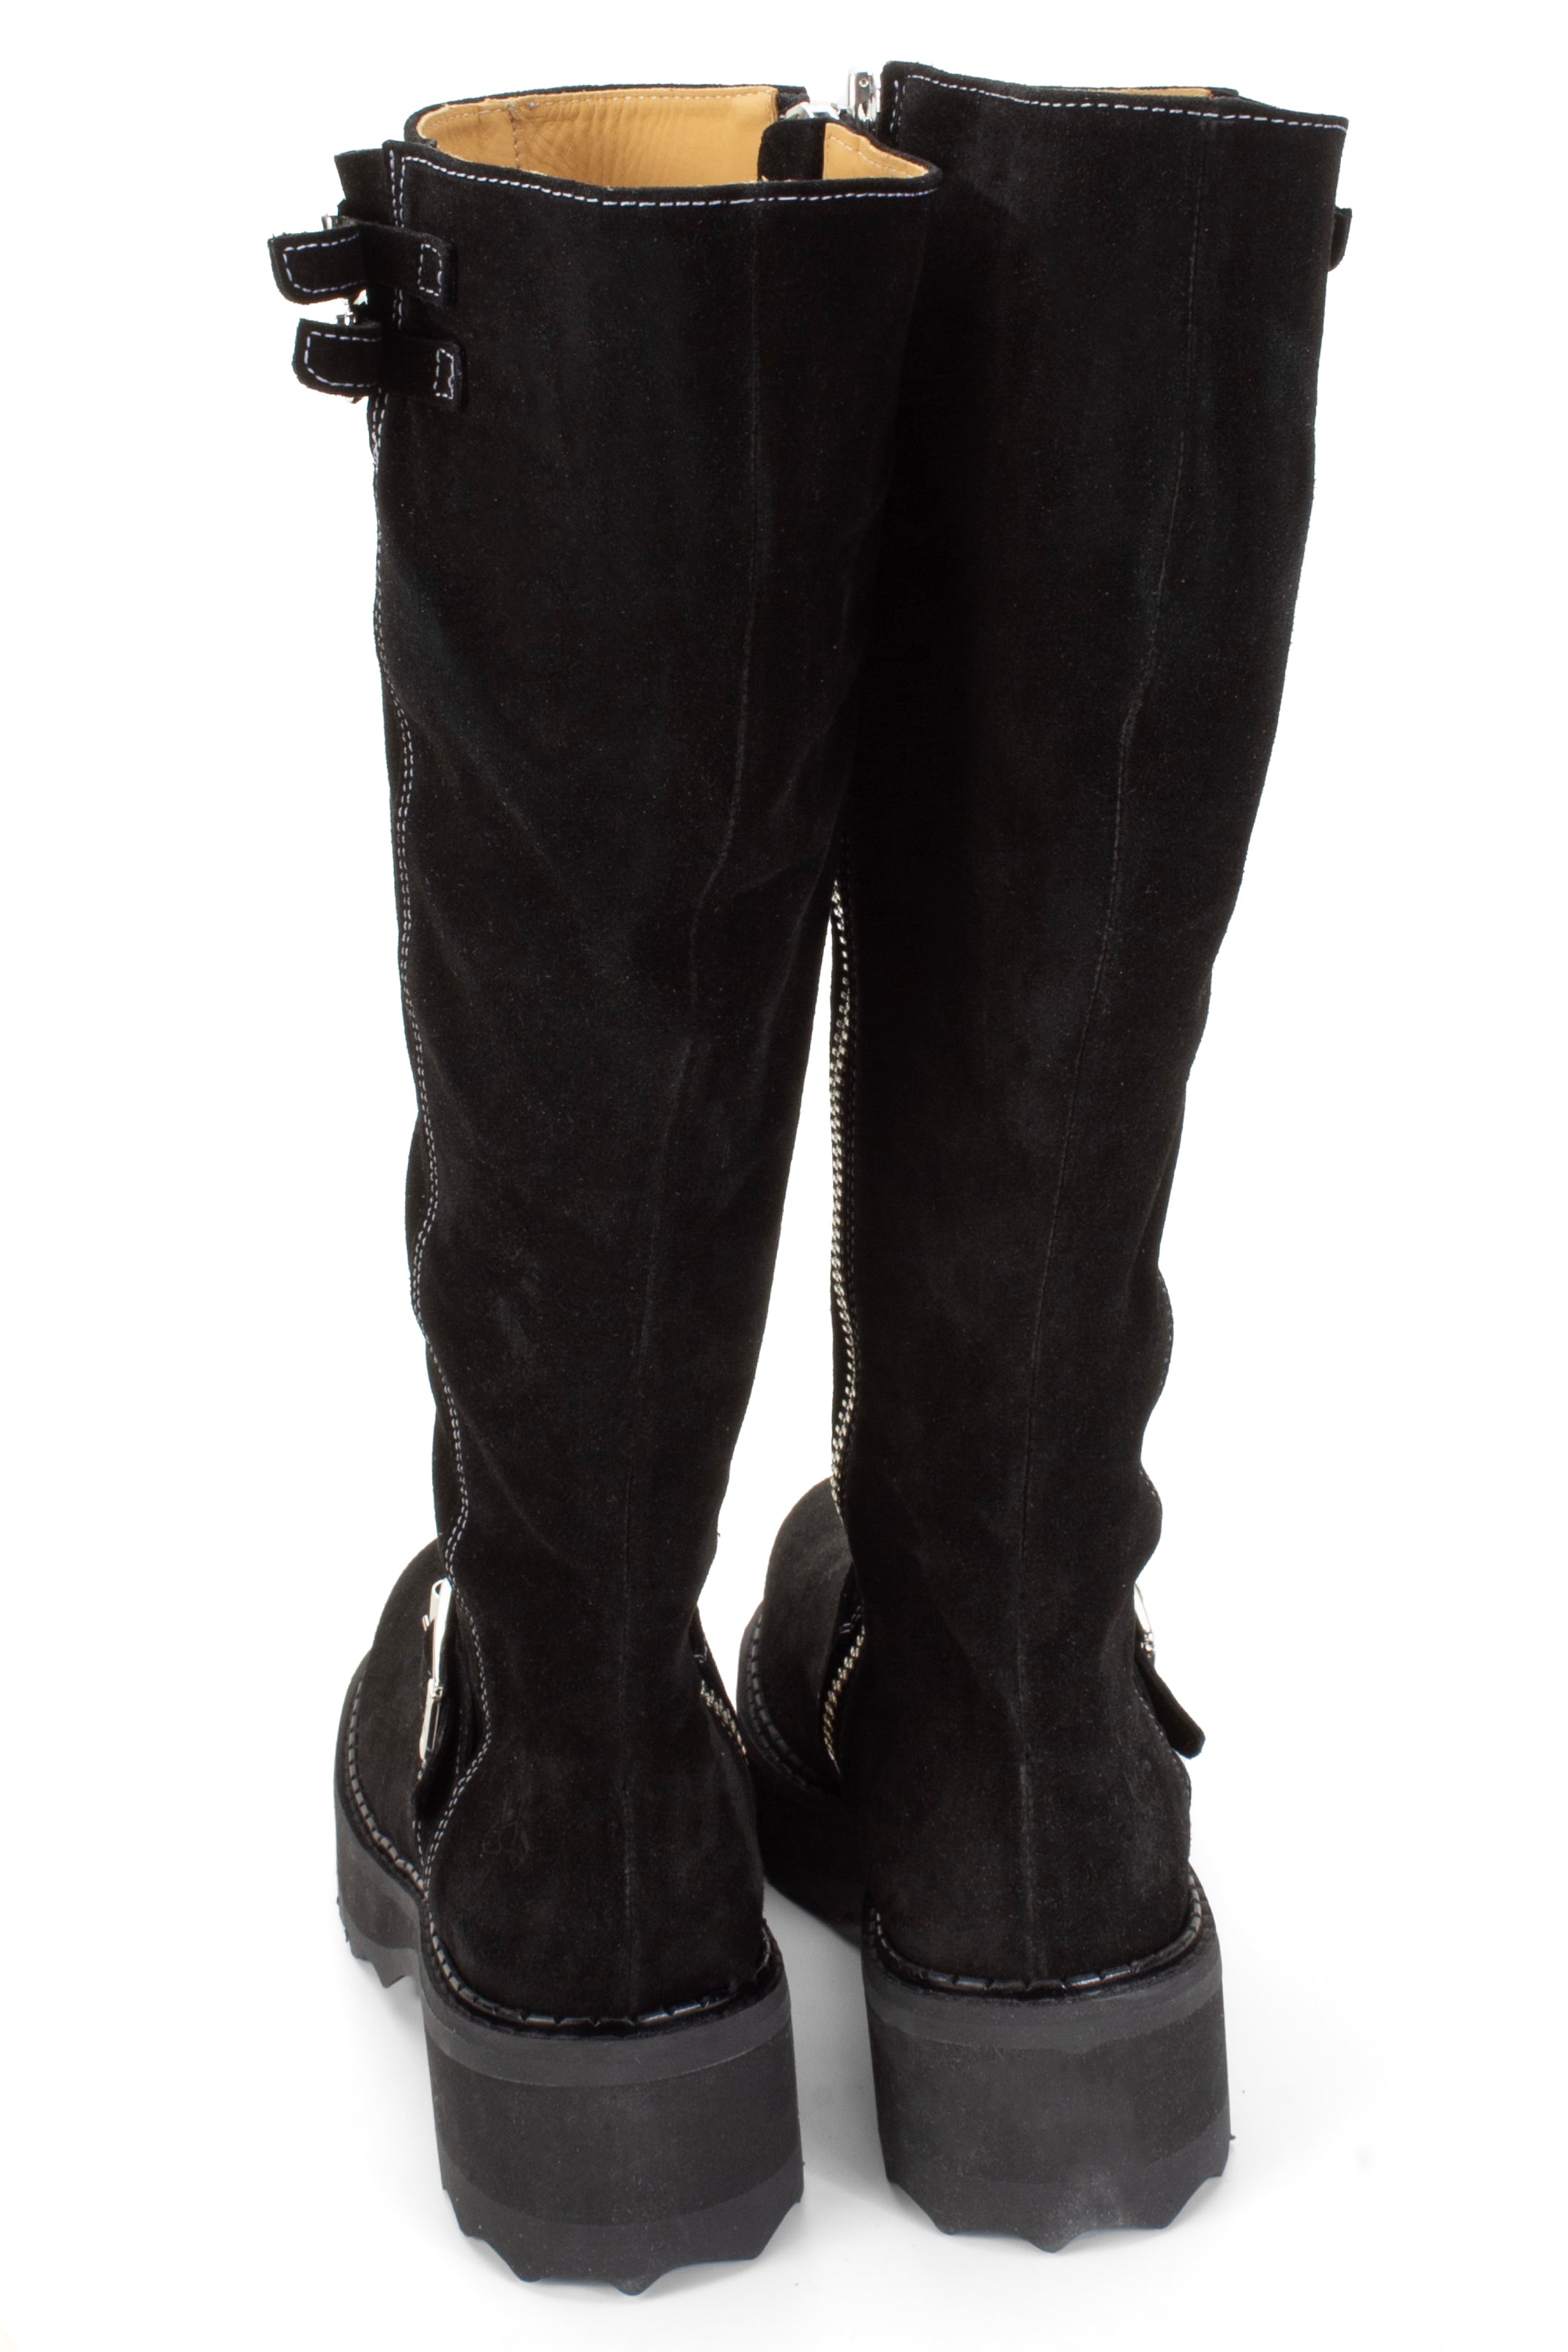 A large zipper inside the boots from top to botom for an easy wear